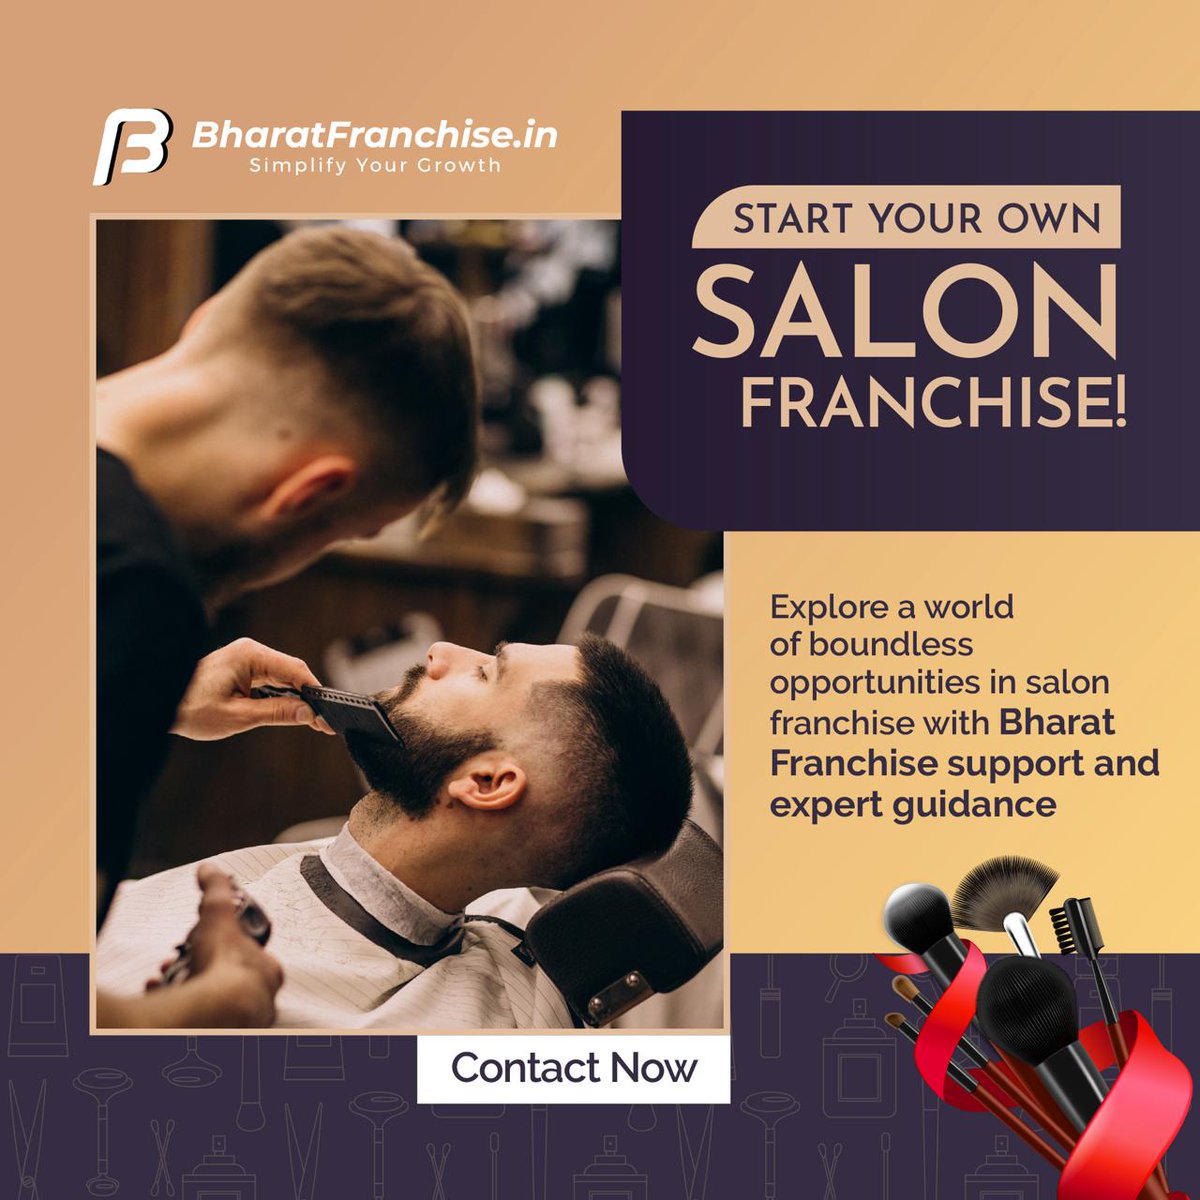 Looking to start a salon franchise within your budget? Explore boundless opportunities in the salon franchise world today with Bharat Franchise 
Contact us - 8248434001. 
#SalonFranchise
#Entrepreneur
#Franchiseopportunity
#Businesssuccess